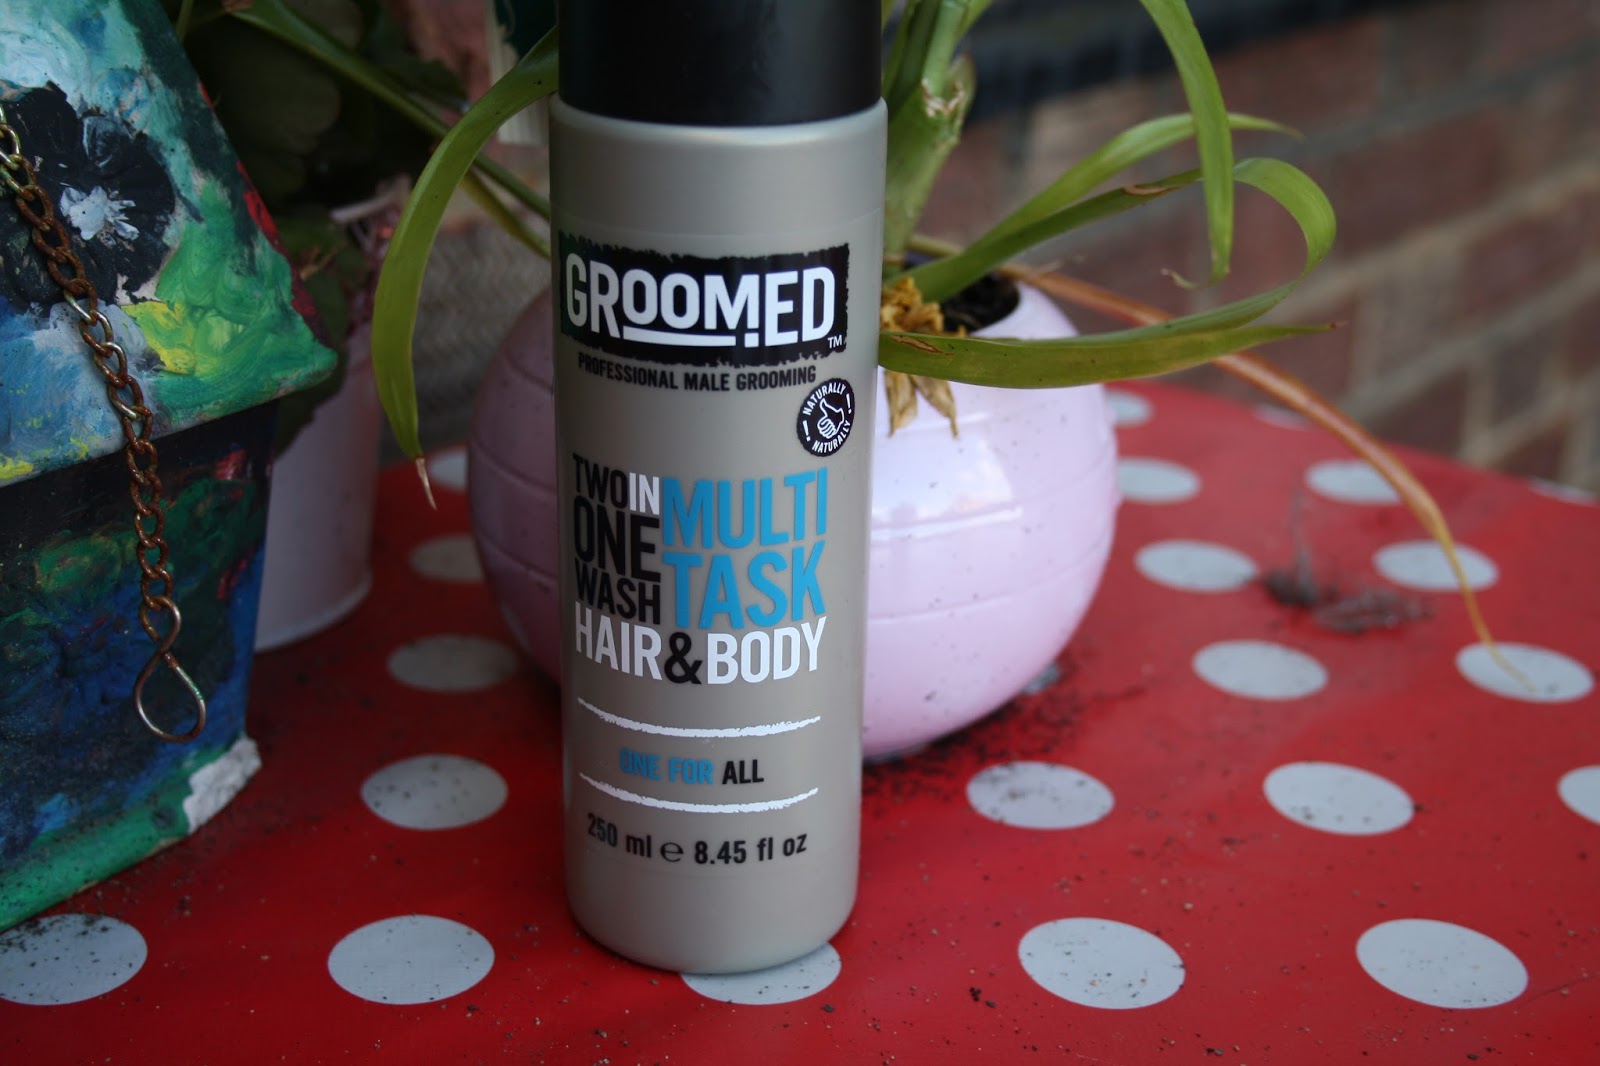 Groomed Two in One Wash - Hair & Body Multitask